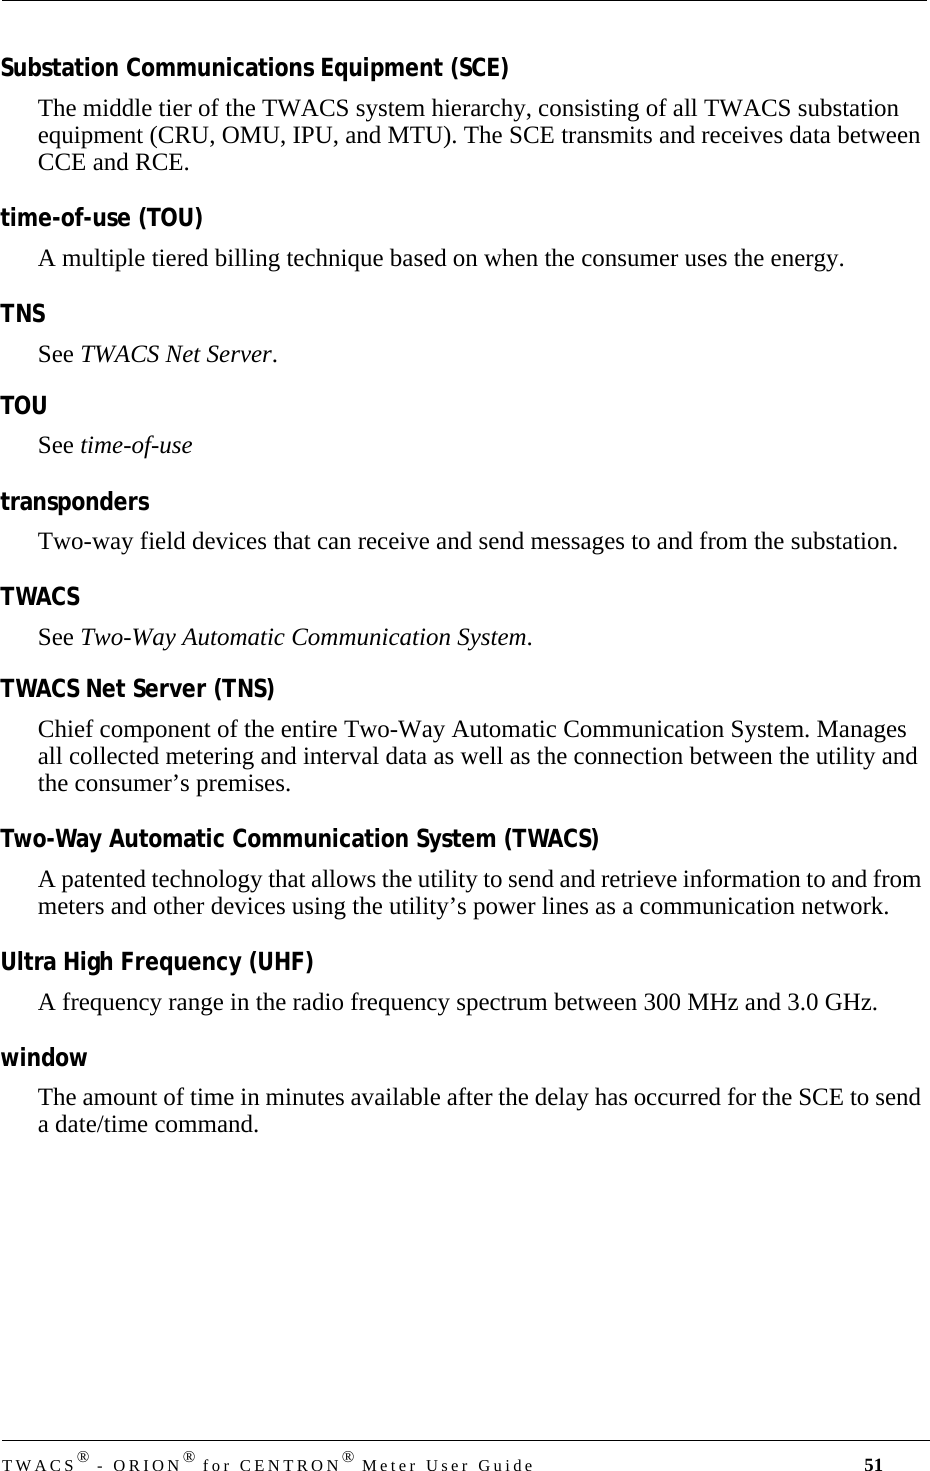 DRAFTTWACS® - ORION® for CENTRON® Meter User Guide 51Substation Communications Equipment (SCE)The middle tier of the TWACS system hierarchy, consisting of all TWACS substation equipment (CRU, OMU, IPU, and MTU). The SCE transmits and receives data between CCE and RCE.time-of-use (TOU)A multiple tiered billing technique based on when the consumer uses the energy.TNSSee TWACS Net Server.TOUSee time-of-usetranspondersTwo-way field devices that can receive and send messages to and from the substation.TWACS See Two-Way Automatic Communication System.TWACS Net Server (TNS)Chief component of the entire Two-Way Automatic Communication System. Manages all collected metering and interval data as well as the connection between the utility and the consumer’s premises.Two-Way Automatic Communication System (TWACS)A patented technology that allows the utility to send and retrieve information to and from meters and other devices using the utility’s power lines as a communication network.Ultra High Frequency (UHF)A frequency range in the radio frequency spectrum between 300 MHz and 3.0 GHz.windowThe amount of time in minutes available after the delay has occurred for the SCE to send a date/time command.